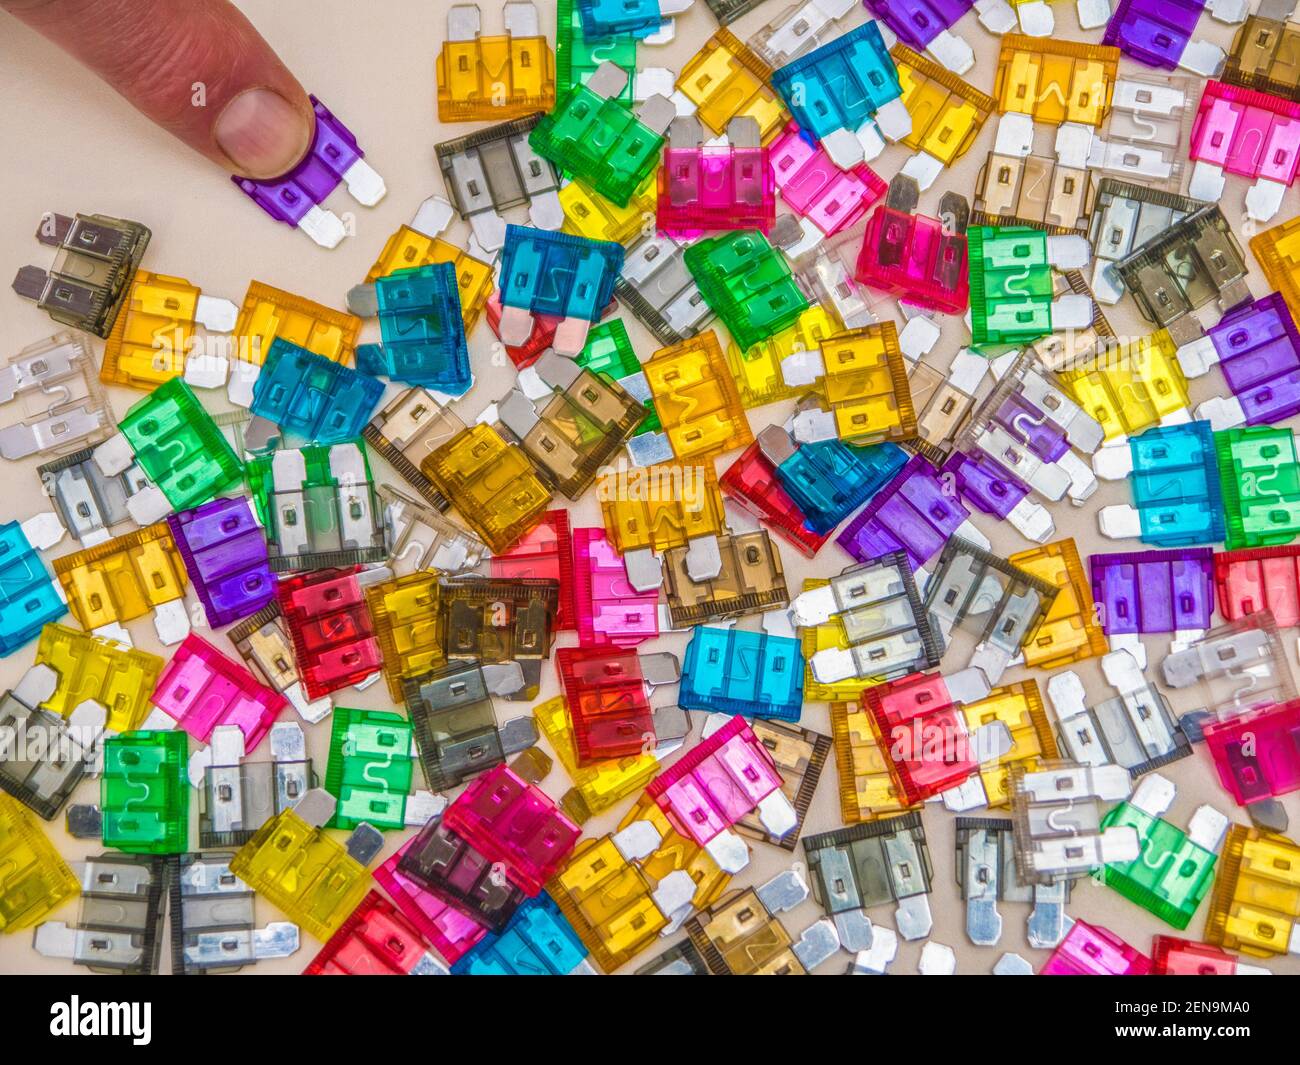 Closeup pov shot of a finger selecting a blade fuse of the required amp rating, from the colourful variety spread out on a flat surface. Stock Photo